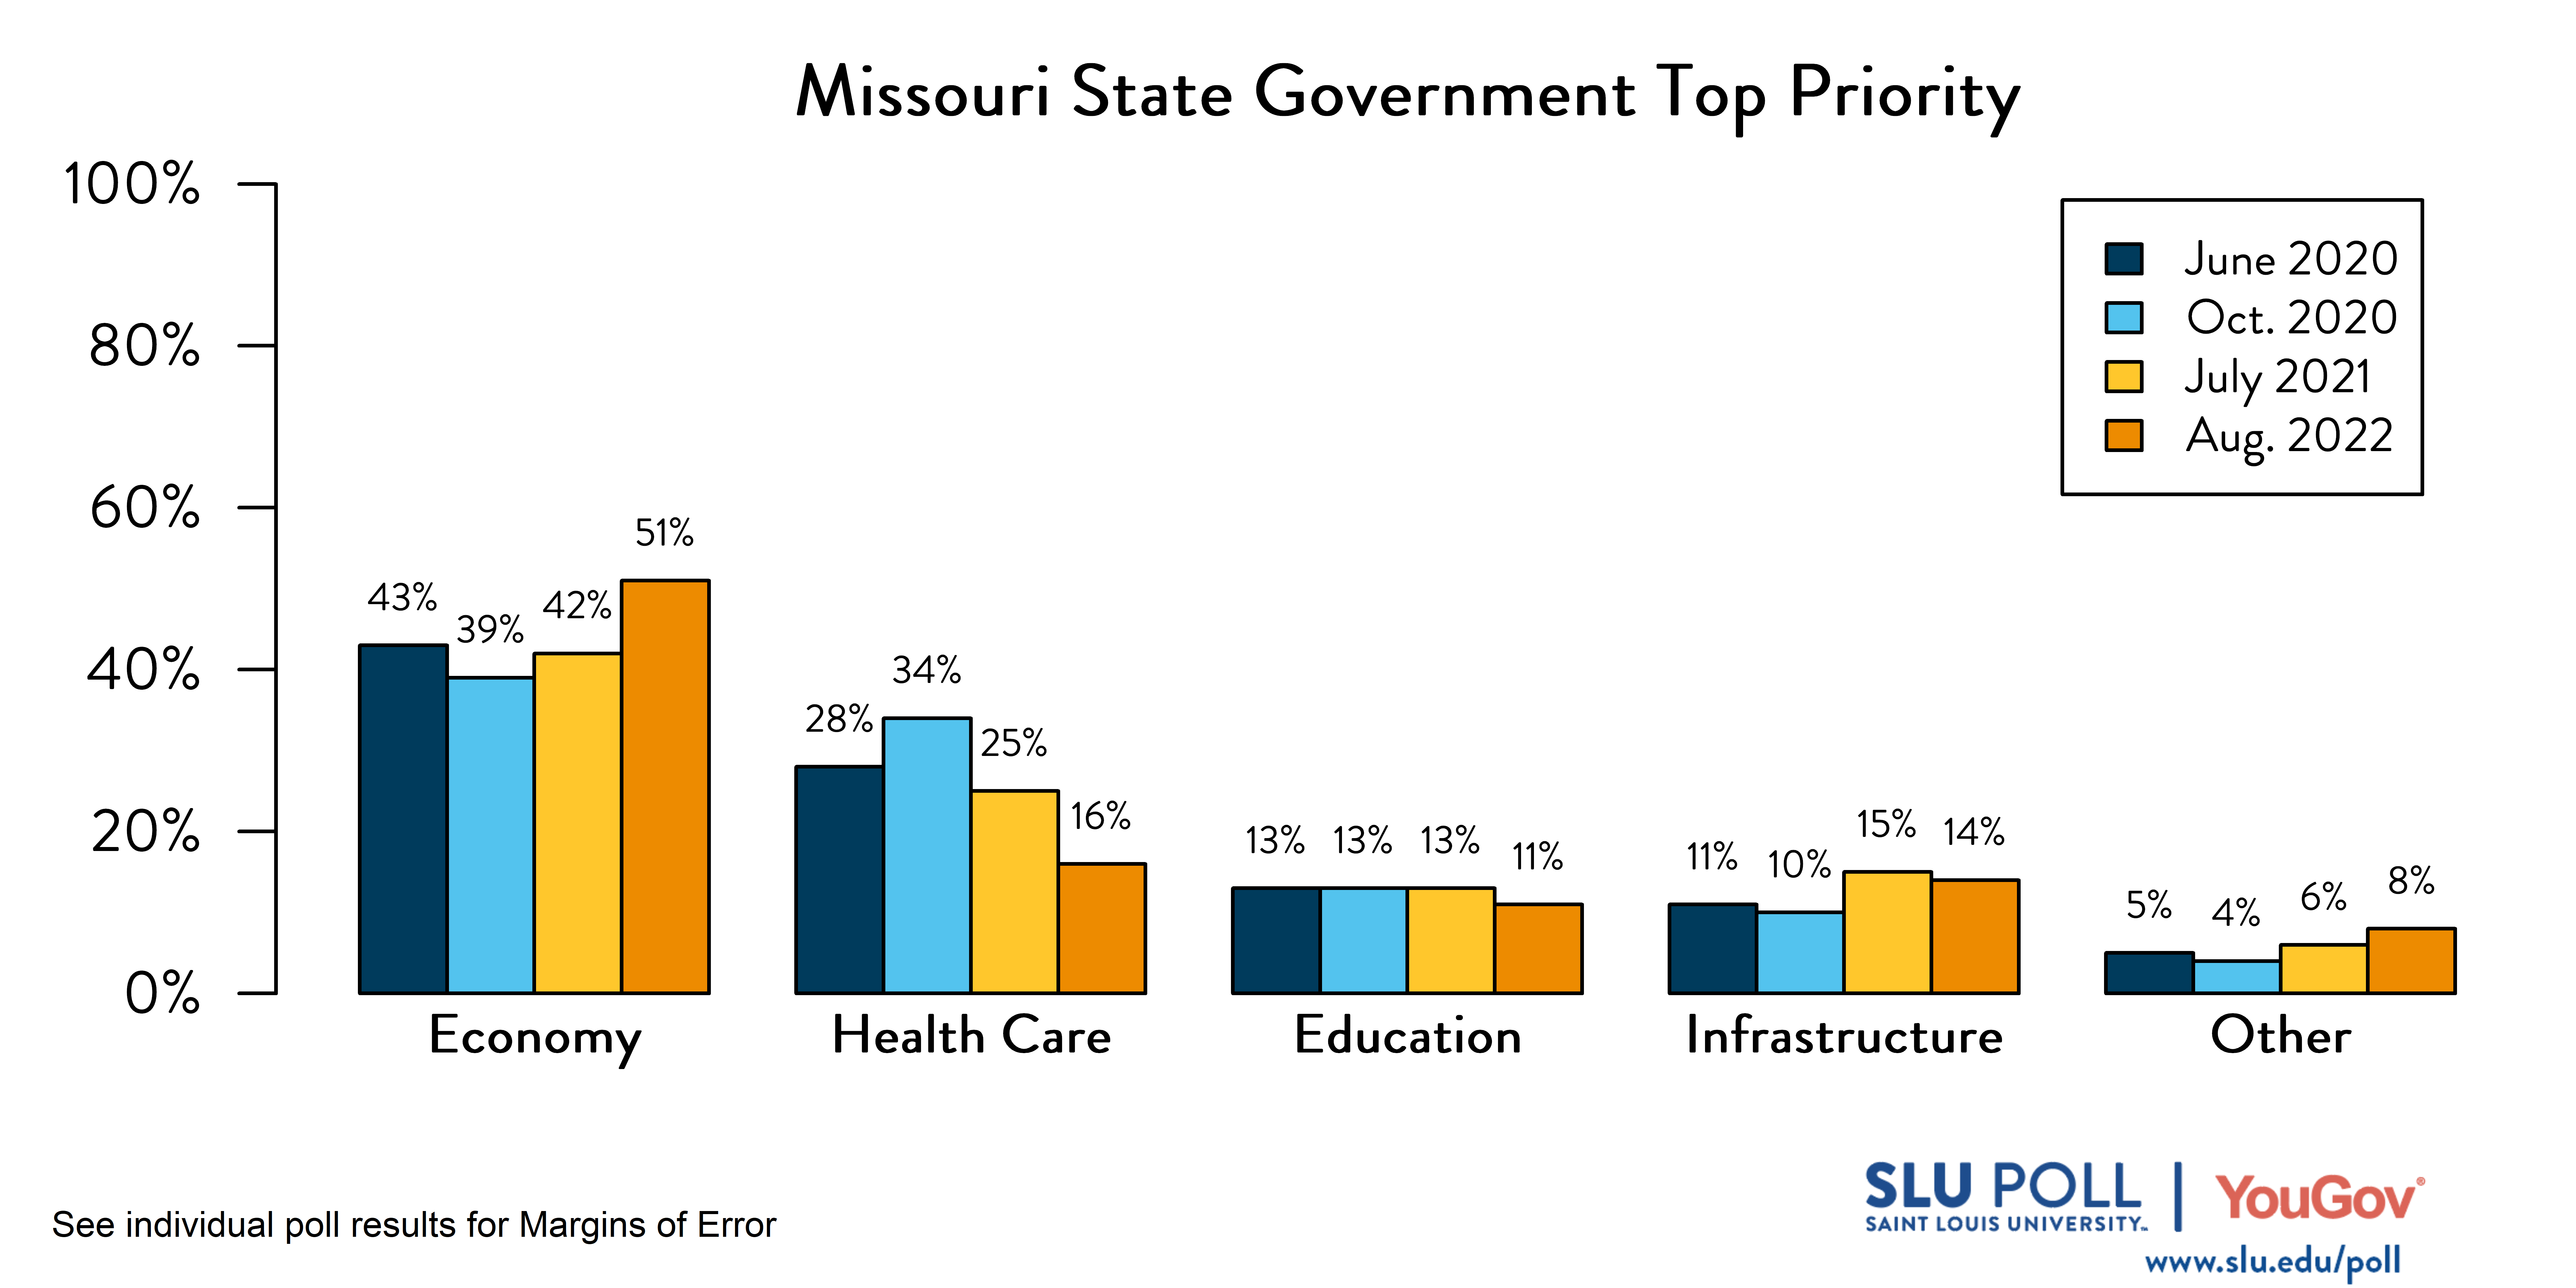 Likely voters' responses to 'Which of the following do you think should be the TOP priority of the Missouri state government?'. June 2020 Voter Responses 43% Economy, 28% Health Care, 13% Education, 11% Infrastructure, and 5% Other. October 2020 Voter Responses: 39% Economy, 34% Health care, 13% Education, 10% Infrastructure, and 4% Other. July 2021 Voter Responses: 42% Economy, 25% Health care, 13% Education, 15% Infrastructure, and 6% Other. August 2021 Voter Responses: 51% Economy, 16% Health care, 11% Education, 14% Infrastructure, and 8% Other.